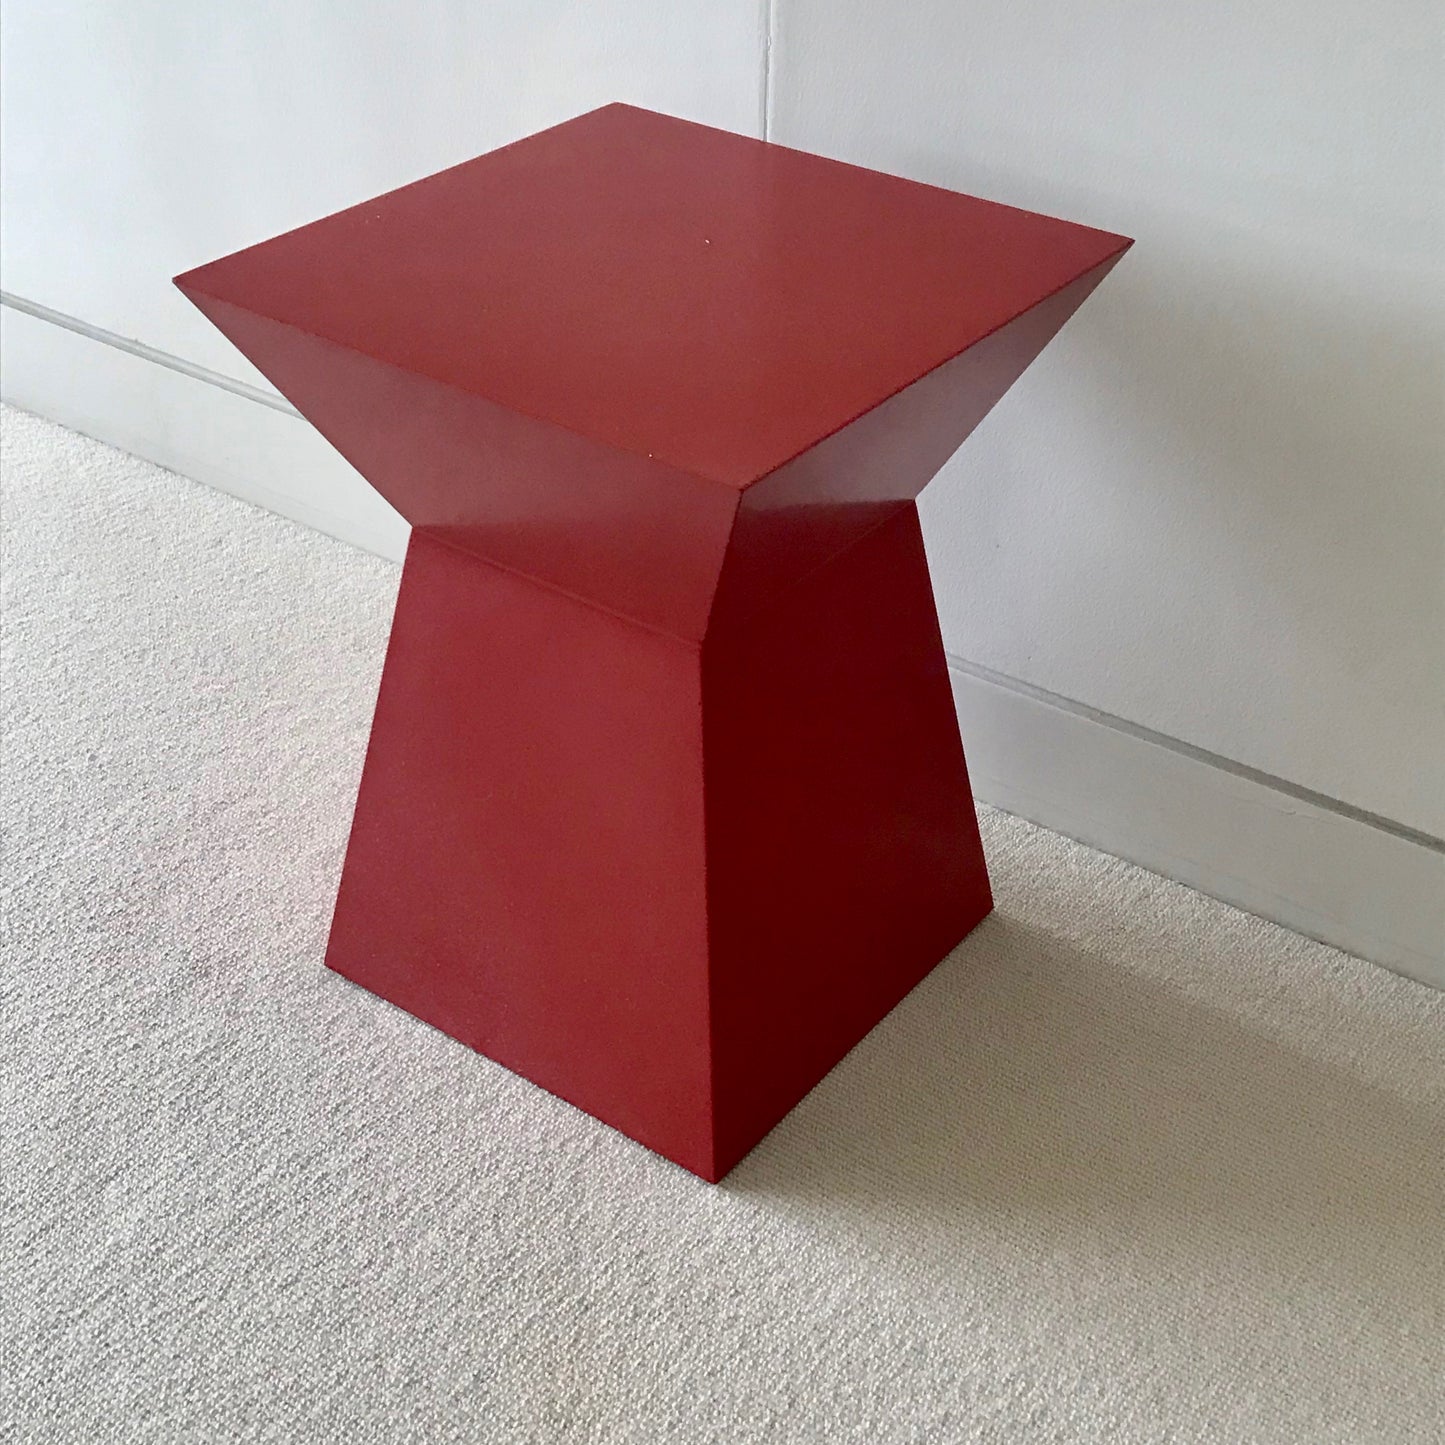 Load image into Gallery viewer, Red Lacquer Side Table by Poliform (2 available)
